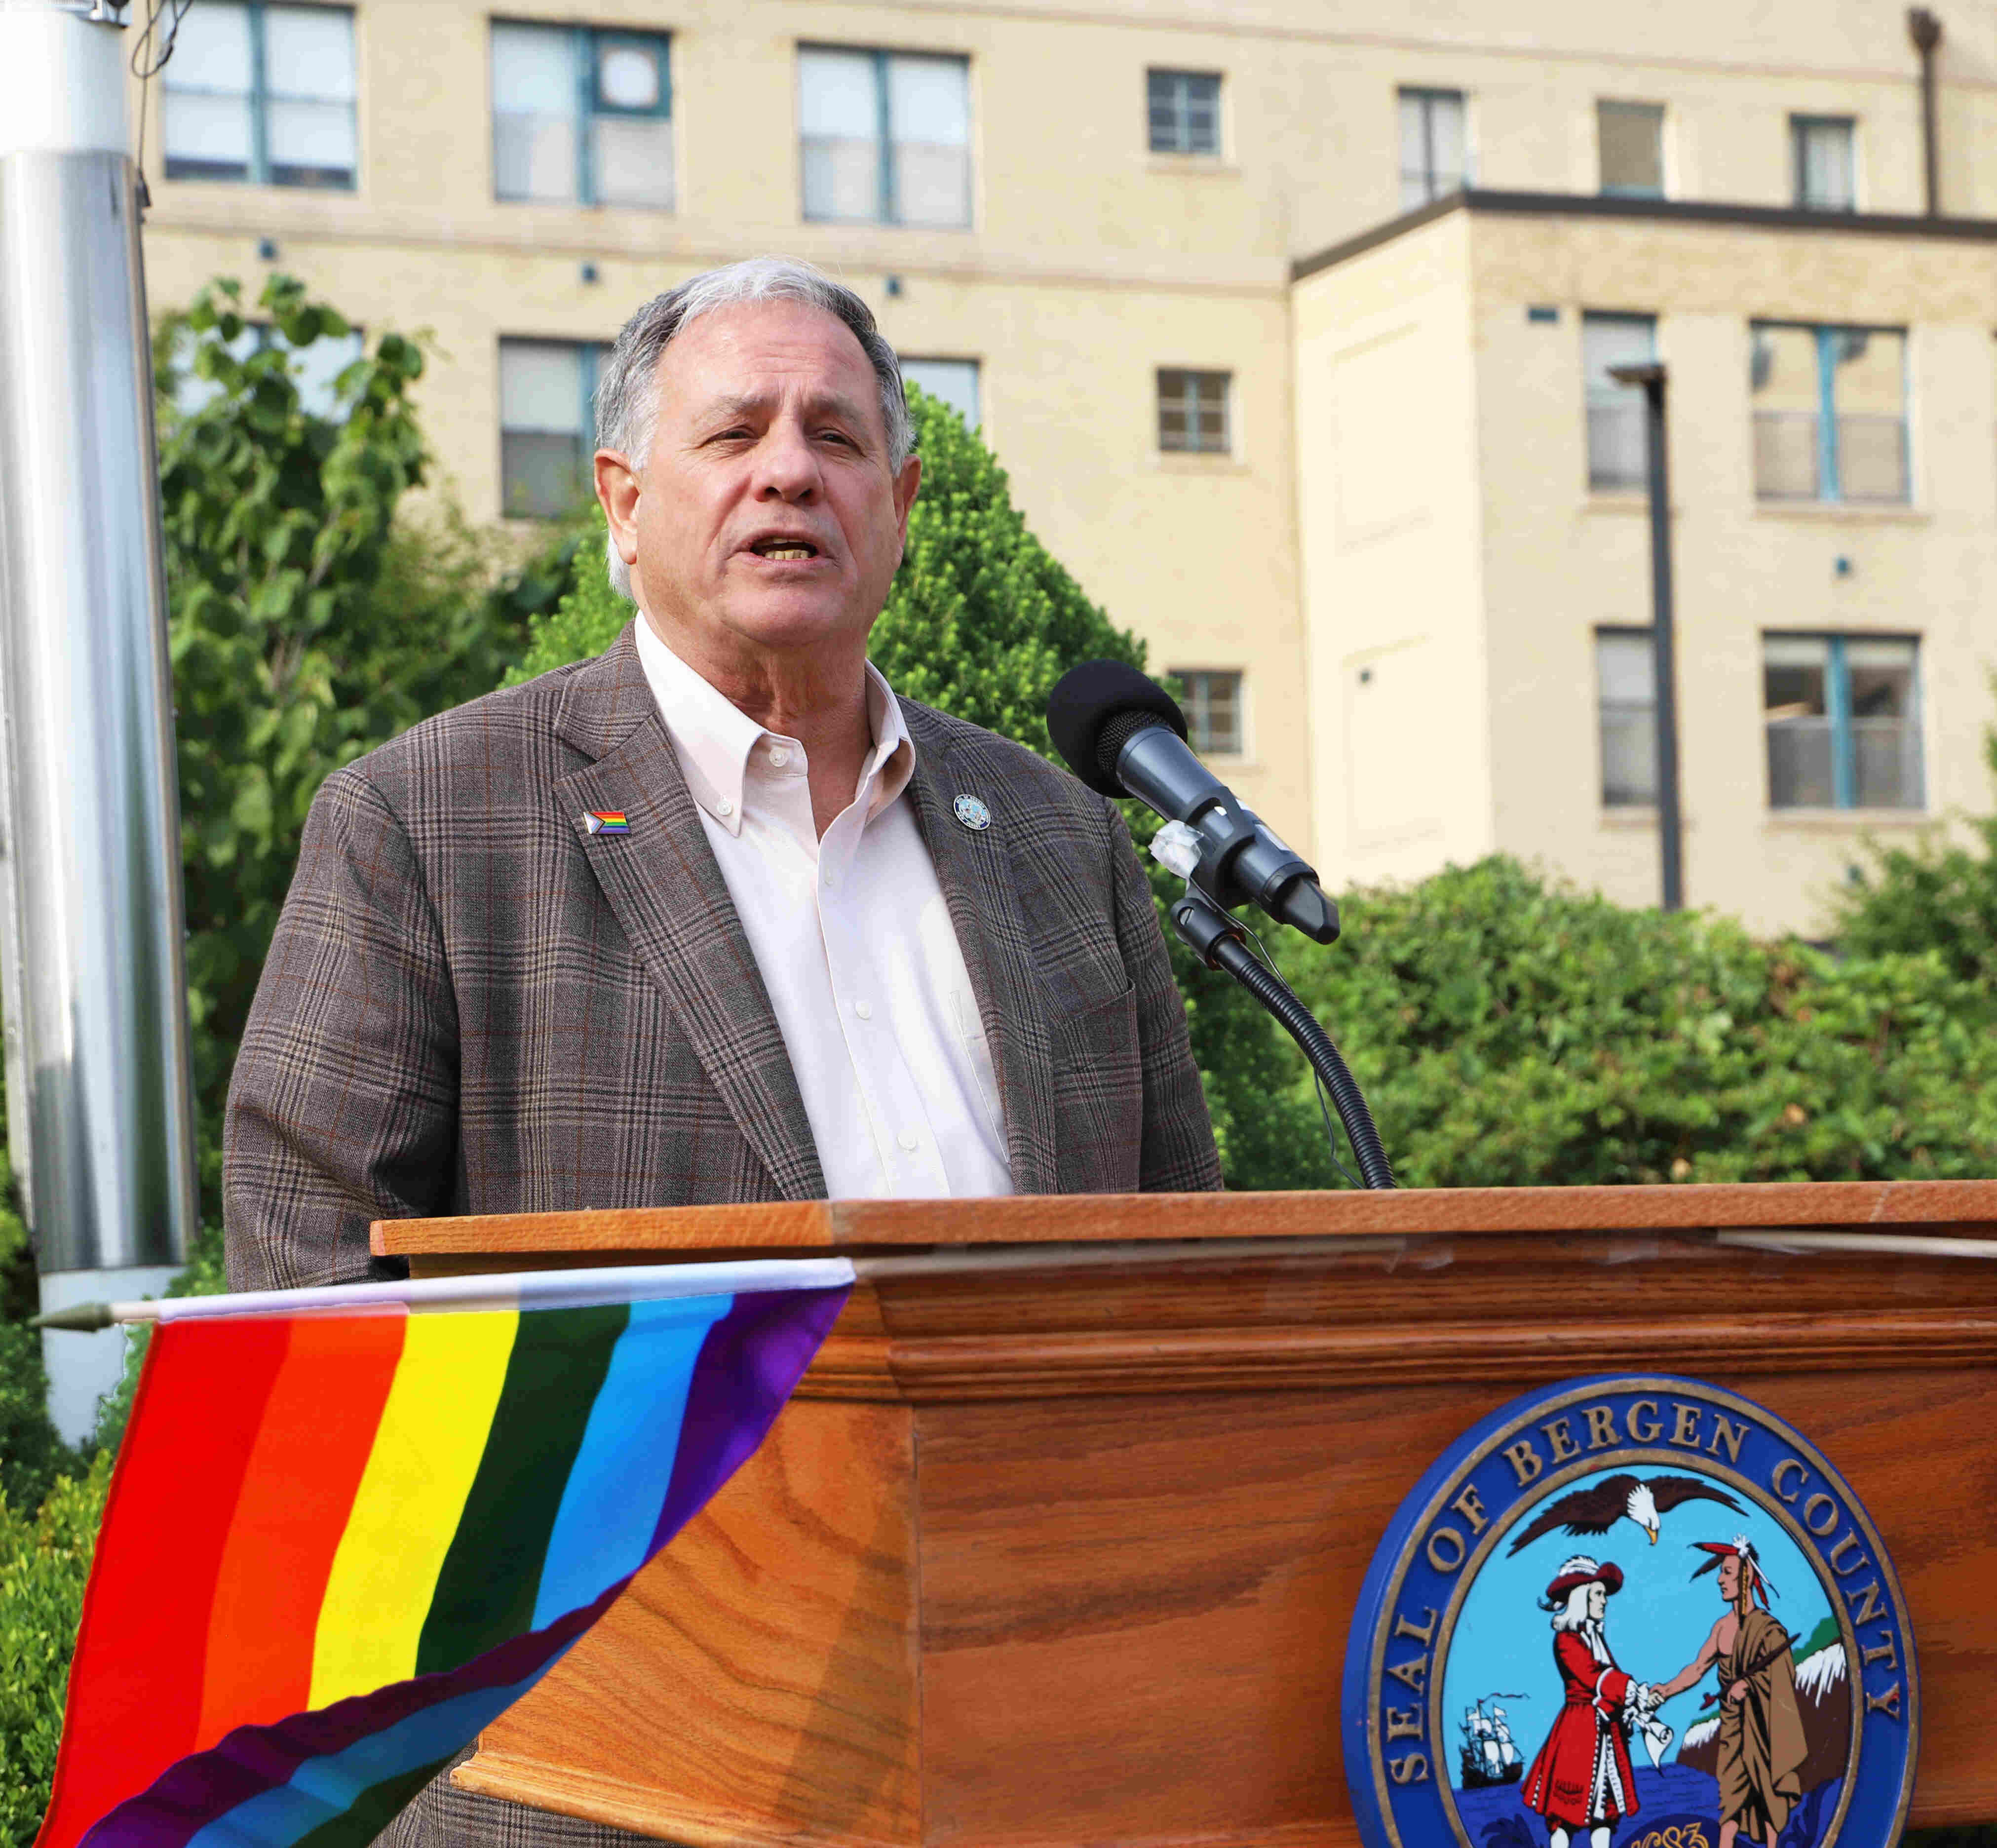 Bergen County Executive James J. Tedesco III delivers remarks to the audience at Bergen County’s Pride Flag Raising at Bergen New Bridge Medical Center.

        